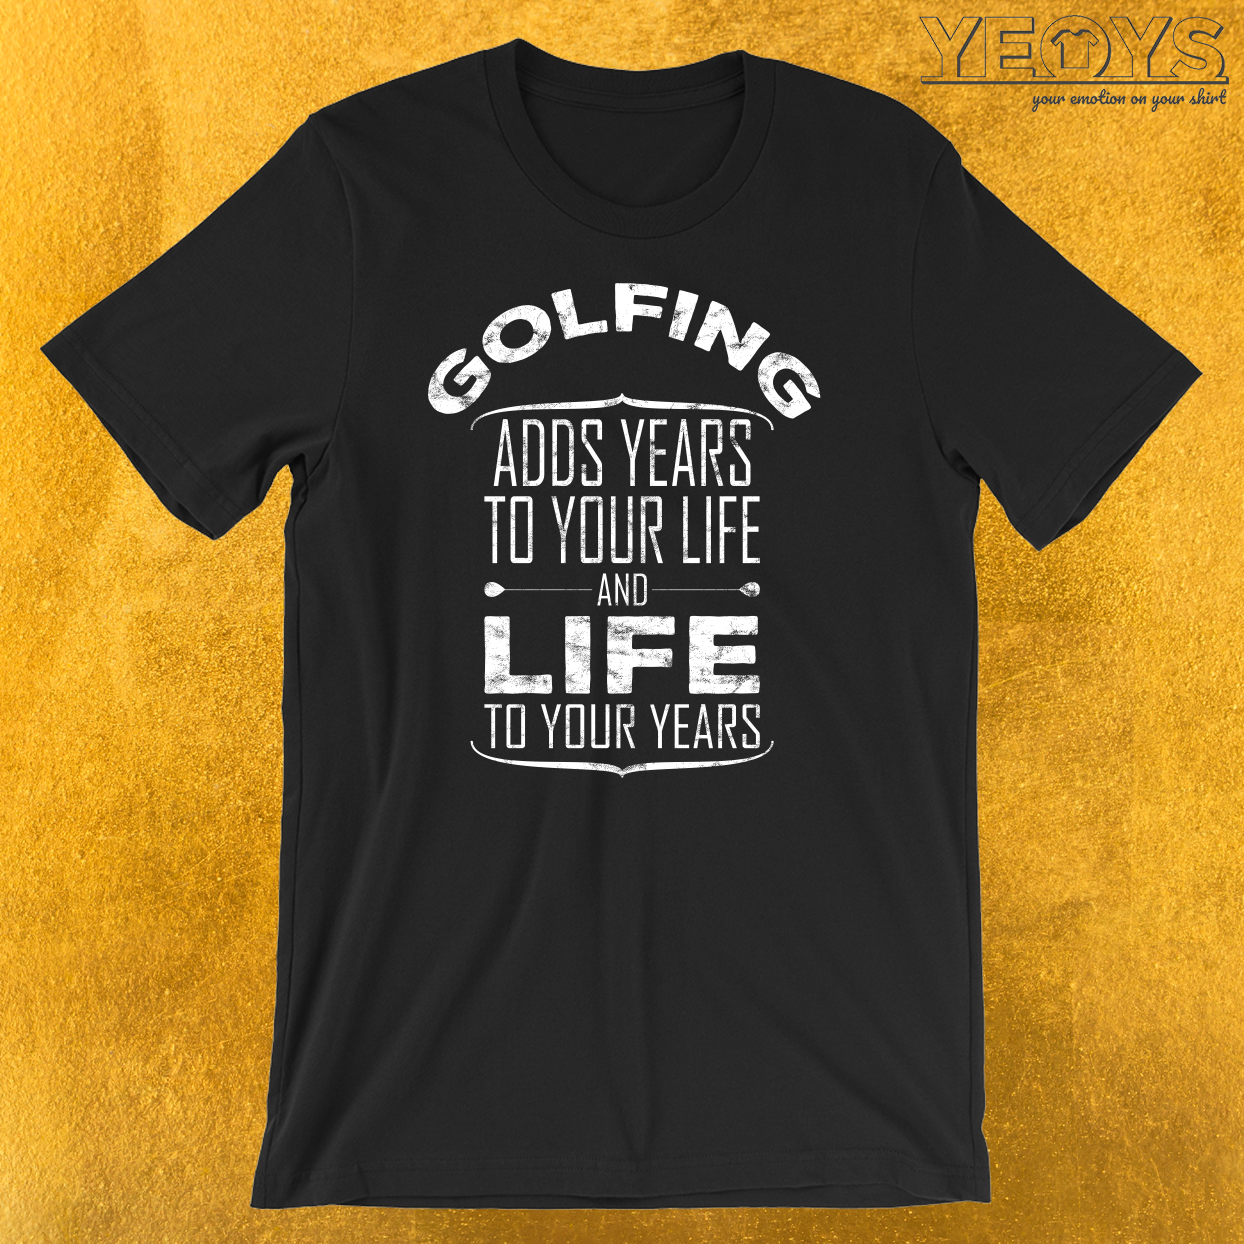 Golfing Adds Life To Your Years T-Shirt